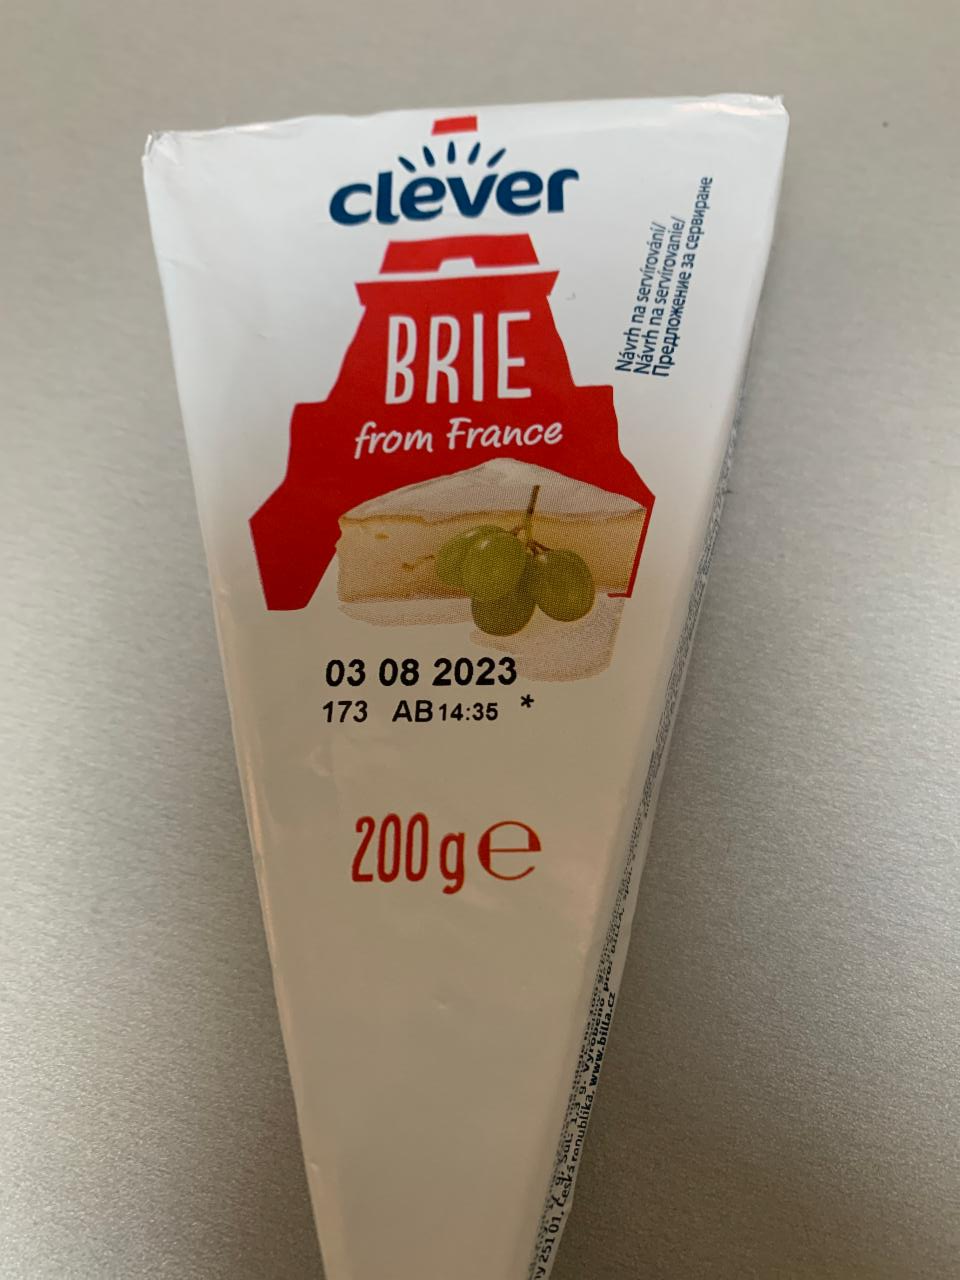 Фото - Сир Брі Brie from France Clever